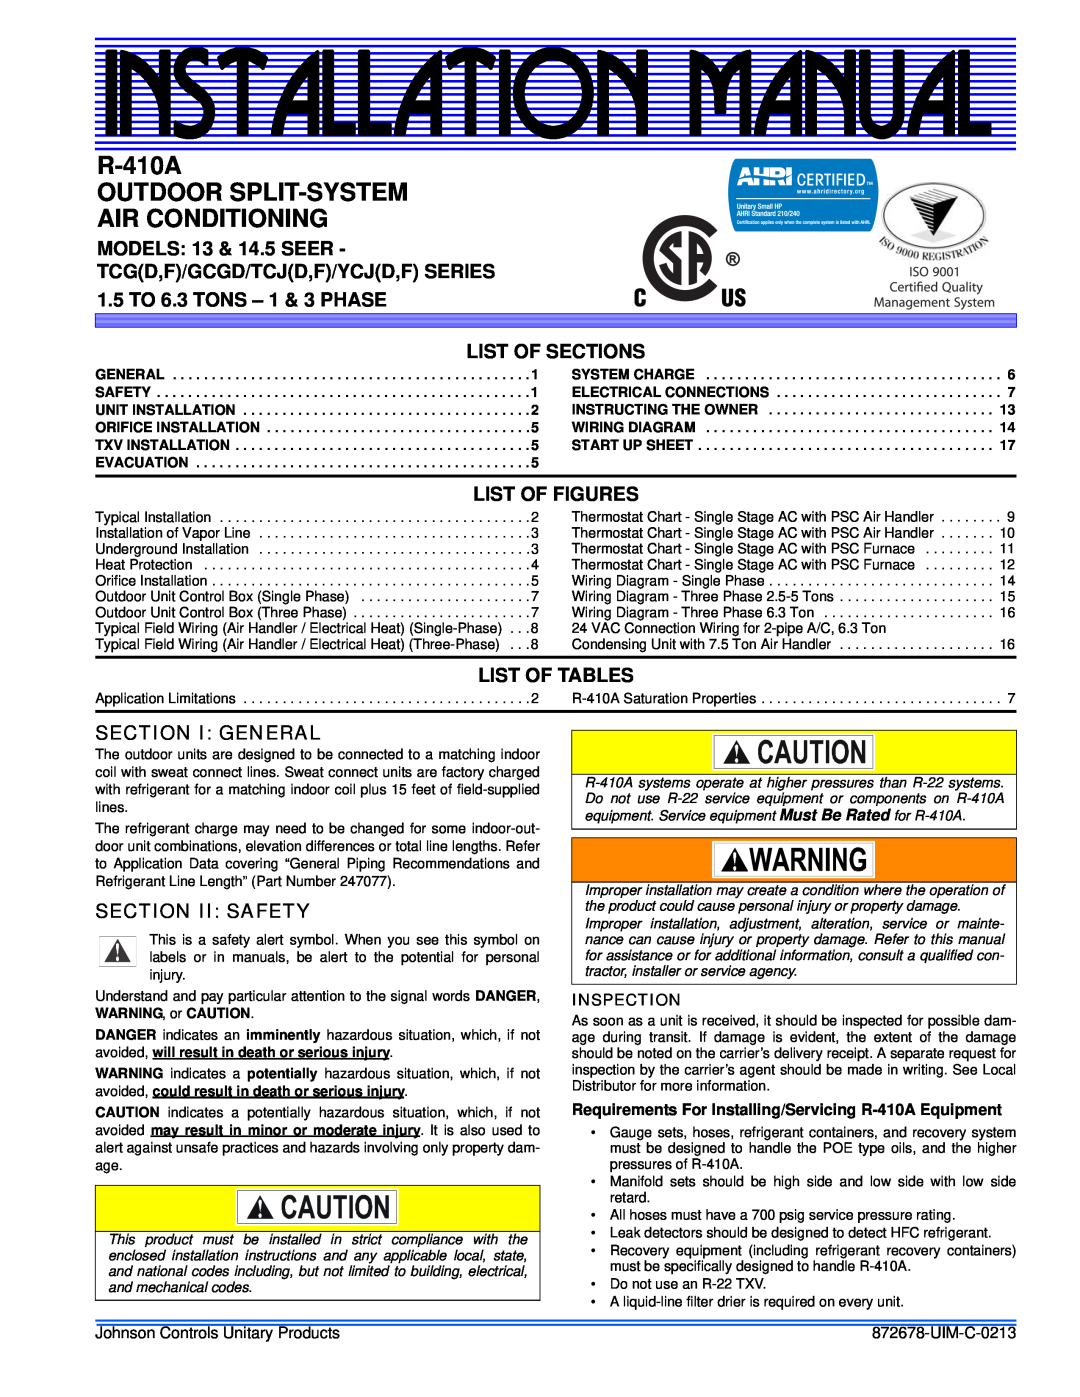 Johnson Controls TCJ(D, YCJ(D installation manual MODELS 13 & 14.5 SEER, List Of Sections, List Of Figures, List Of Tables 